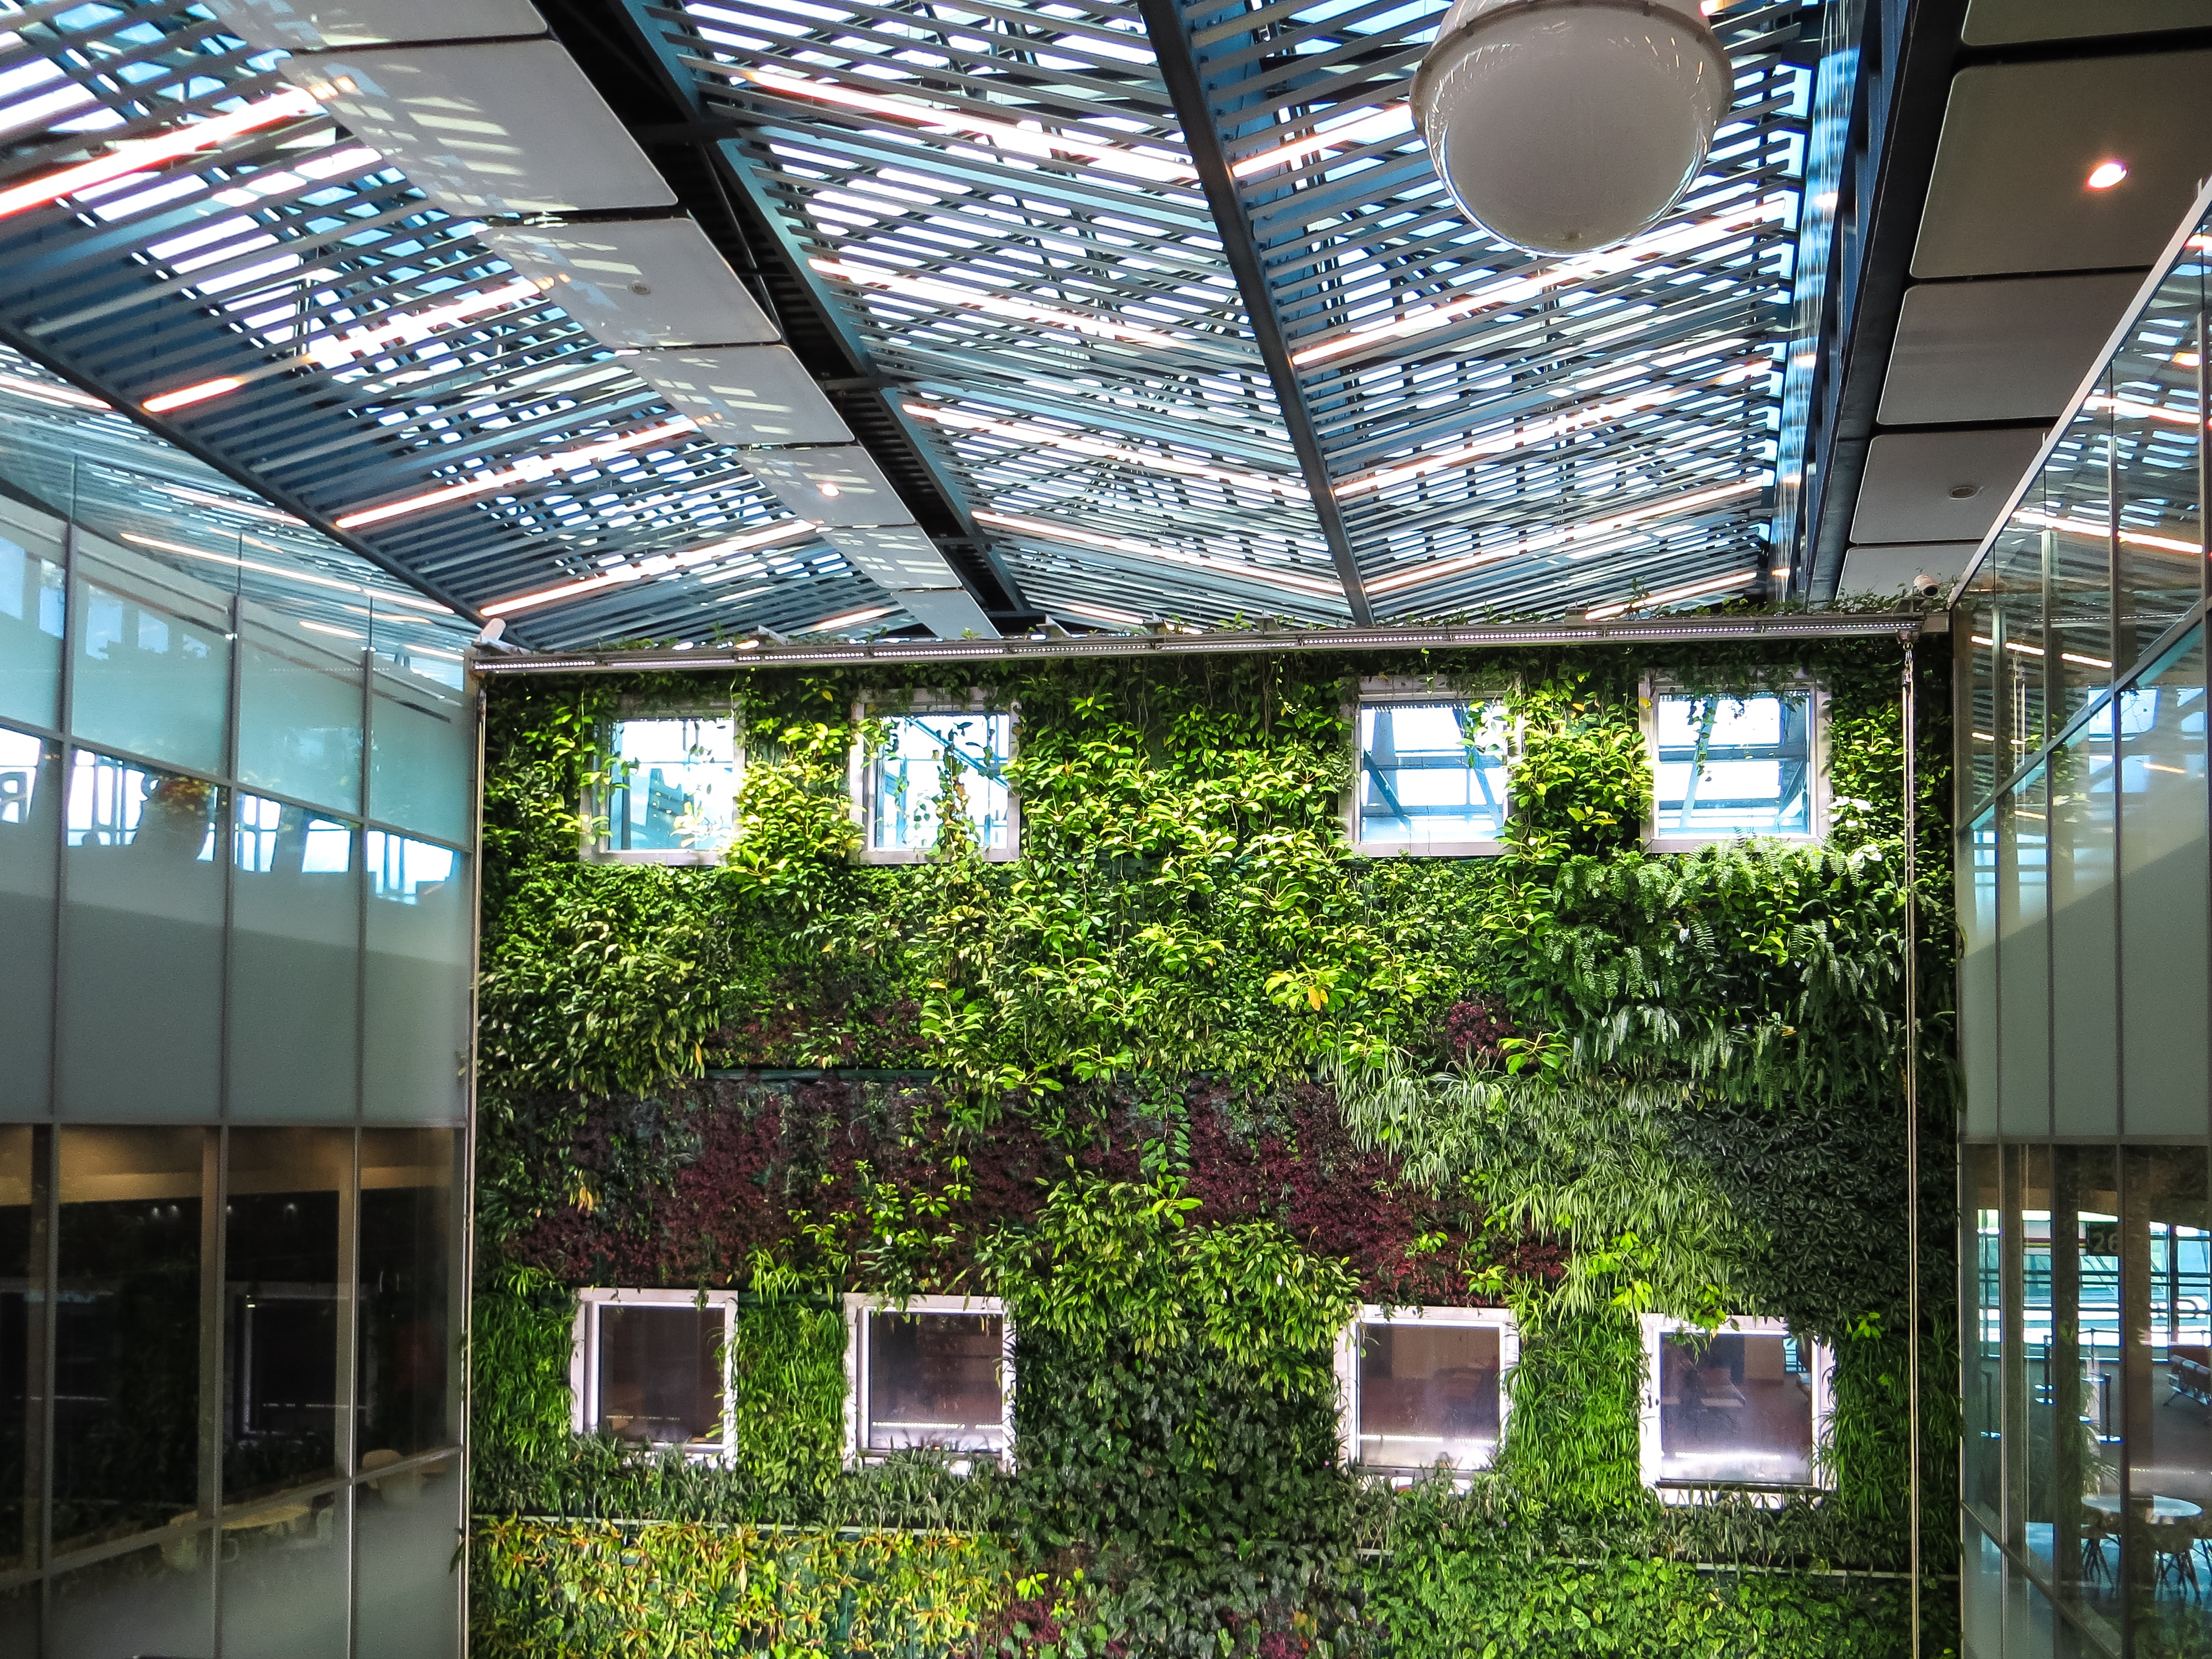 A small building covered in greenery sits inside a large glass office building